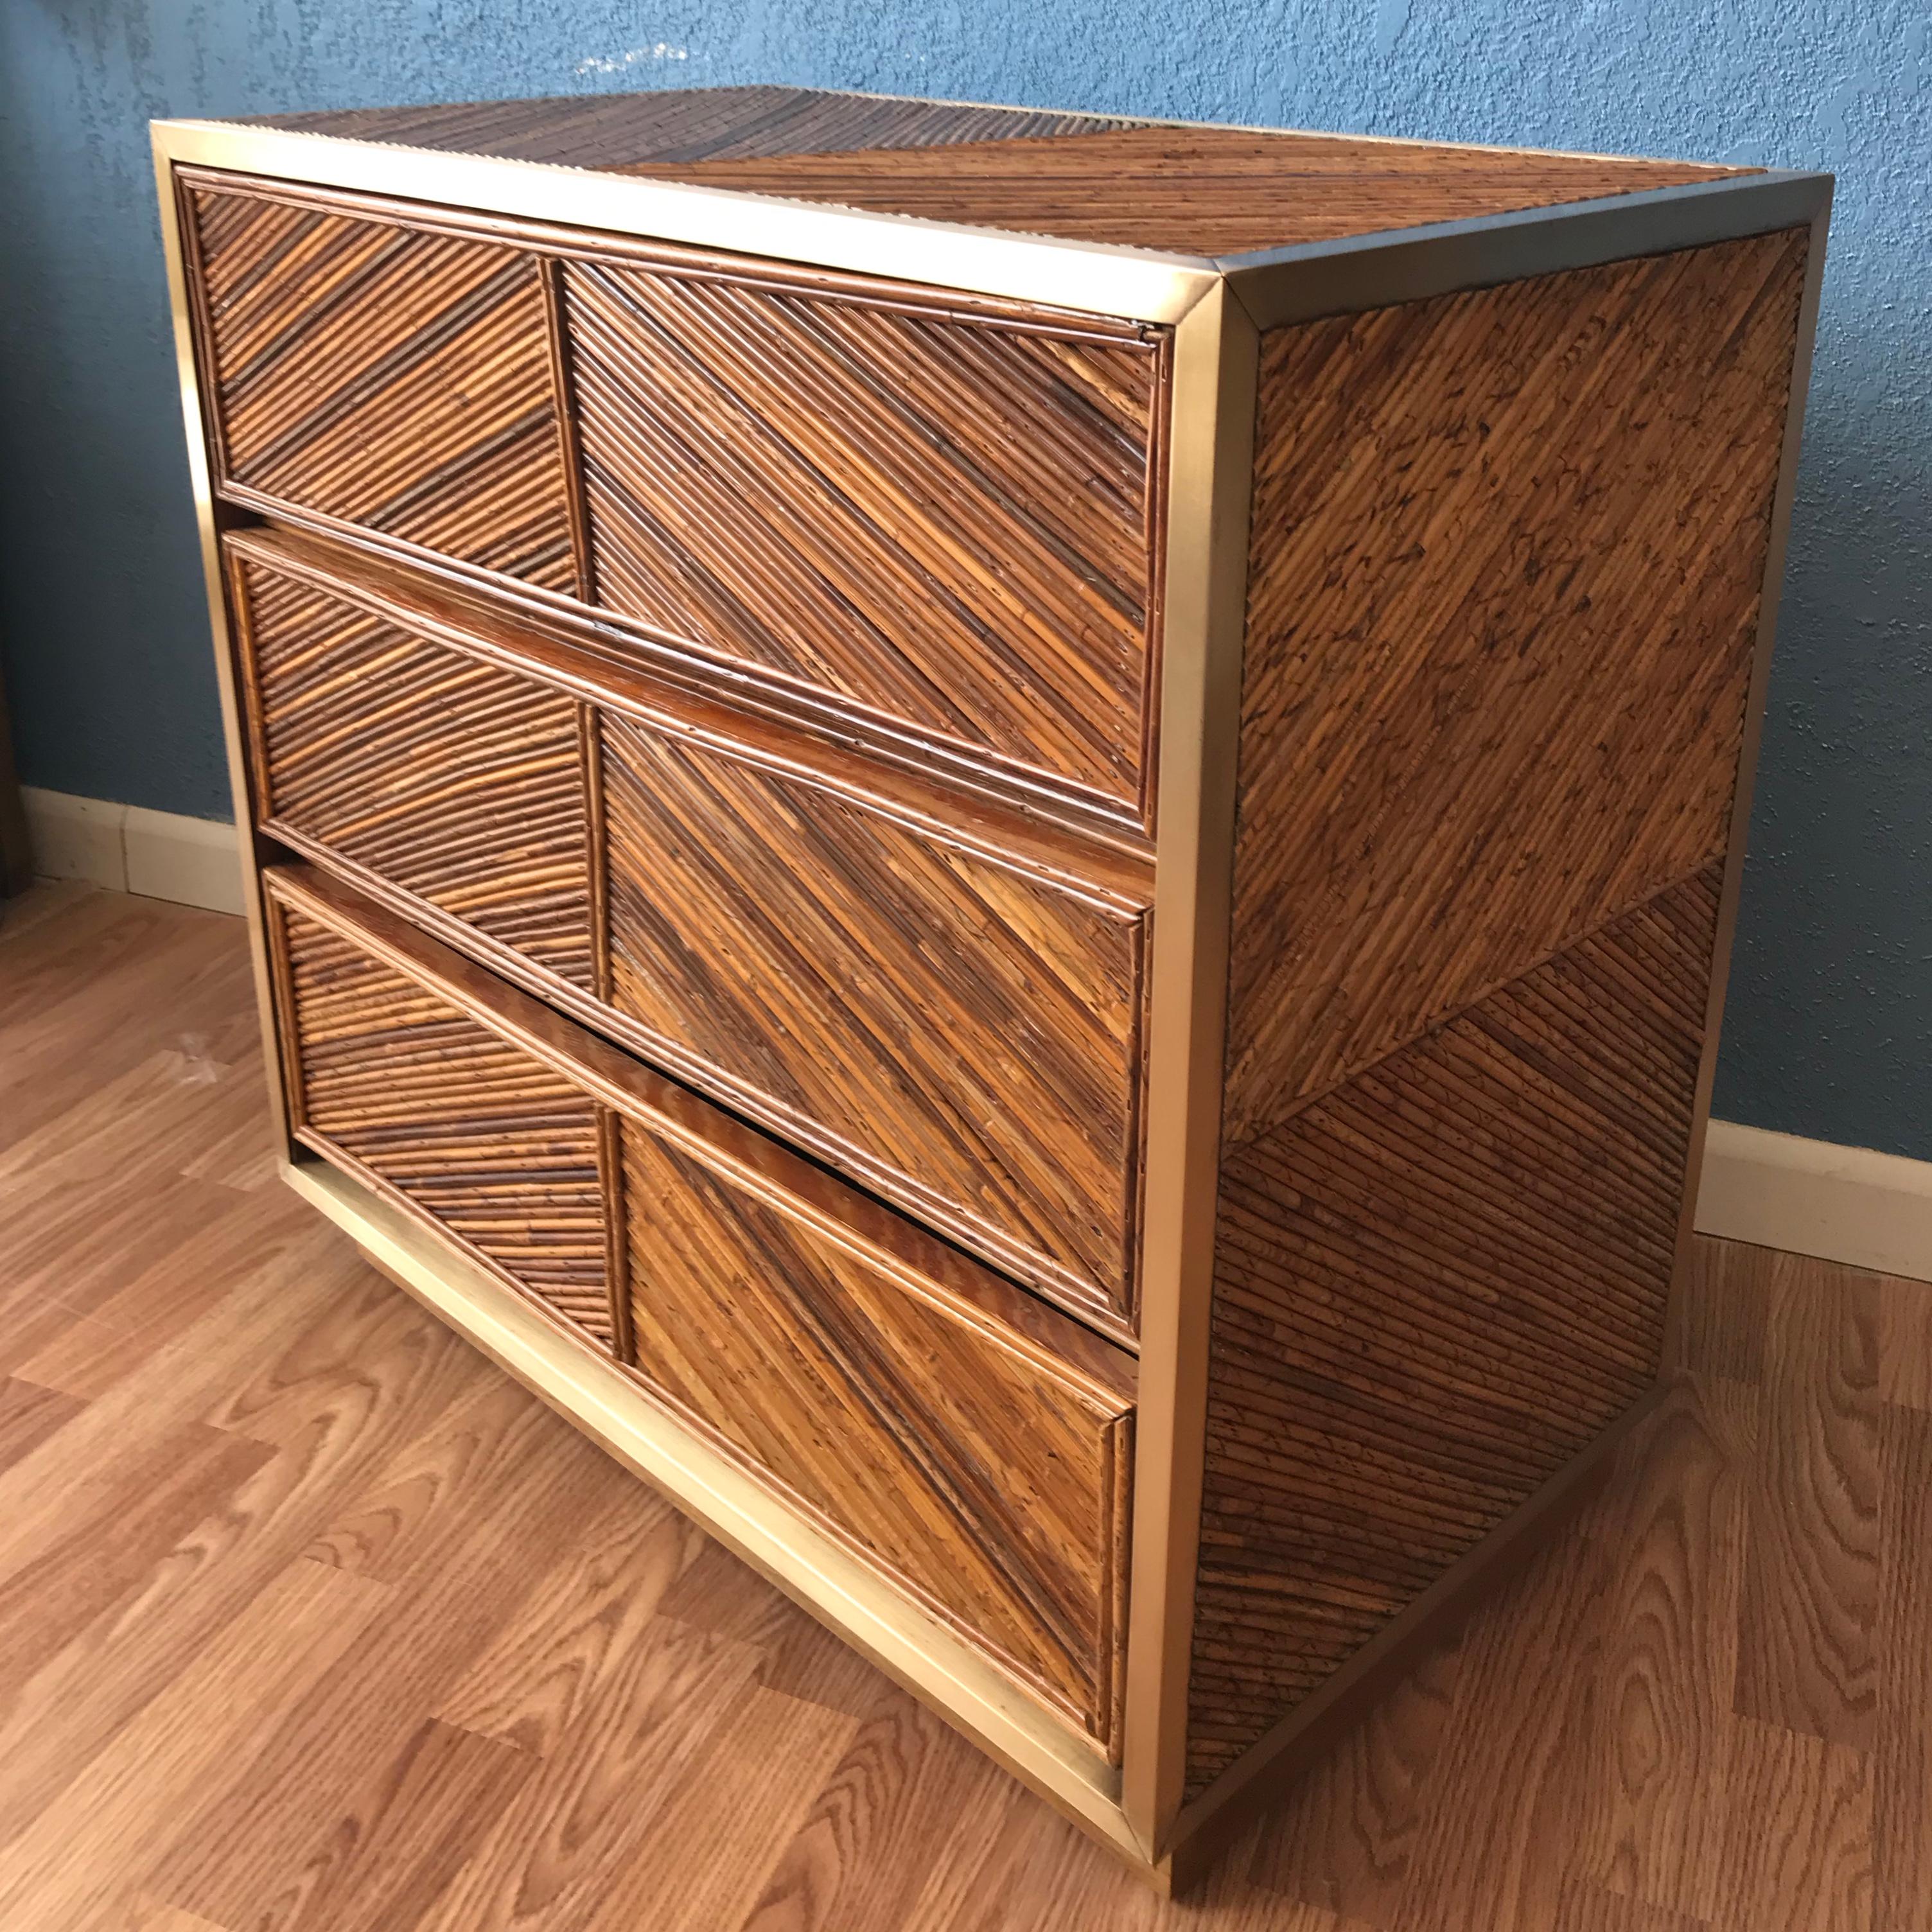 Sharp design: The dresser is beautifully finished on all four sides with extensive stick rattan
geometric inlays. It is appointed with brass accents. Nice size and form.